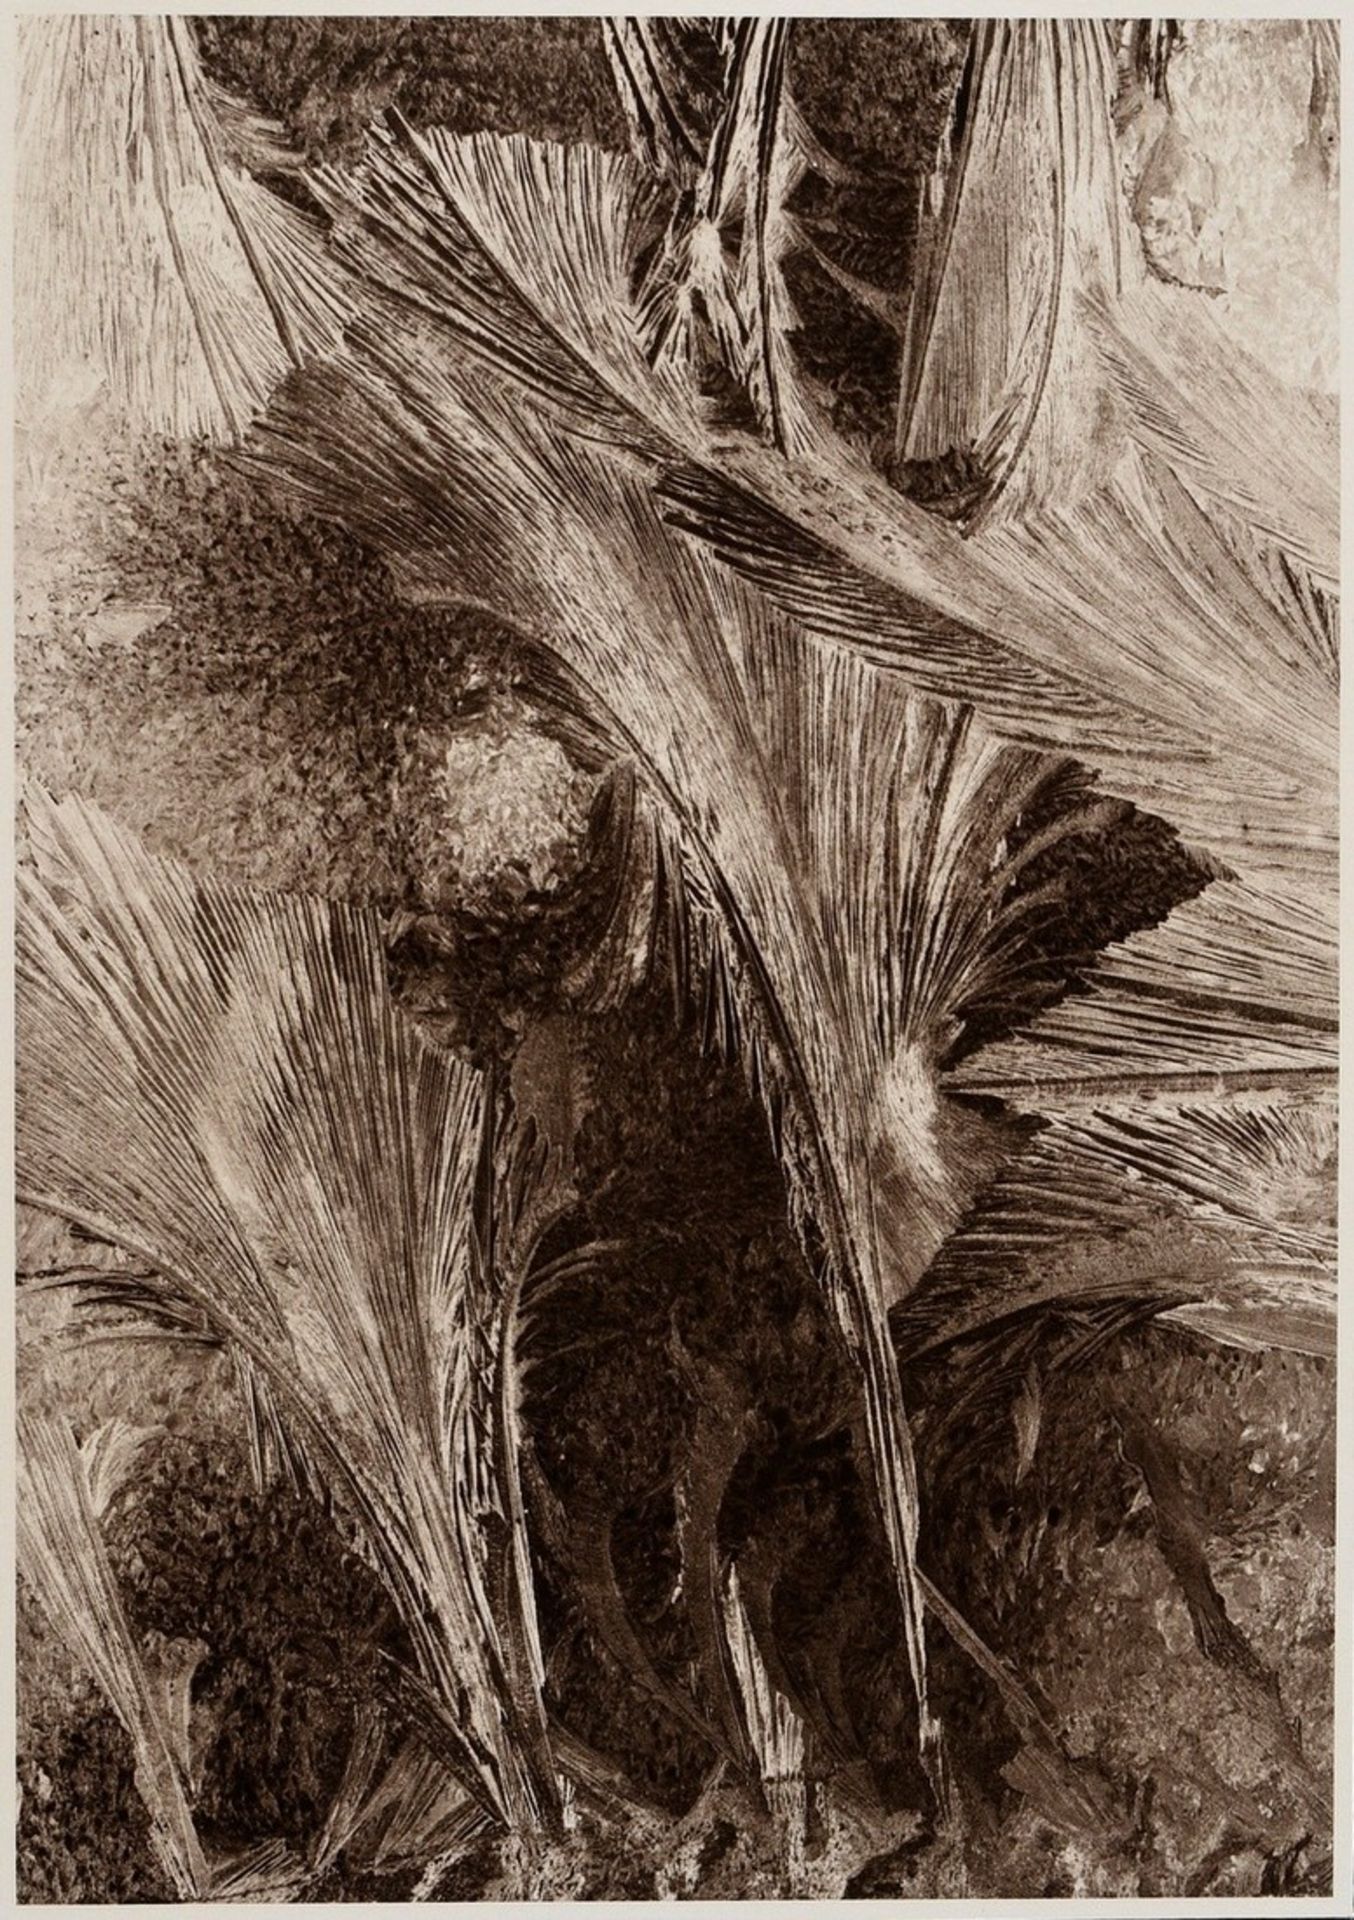 6 Koch, Fred (1904-1947) "Ice Crystals, Mushrooms, Animals", photographs mounted on cardboard, insc - Image 16 of 20